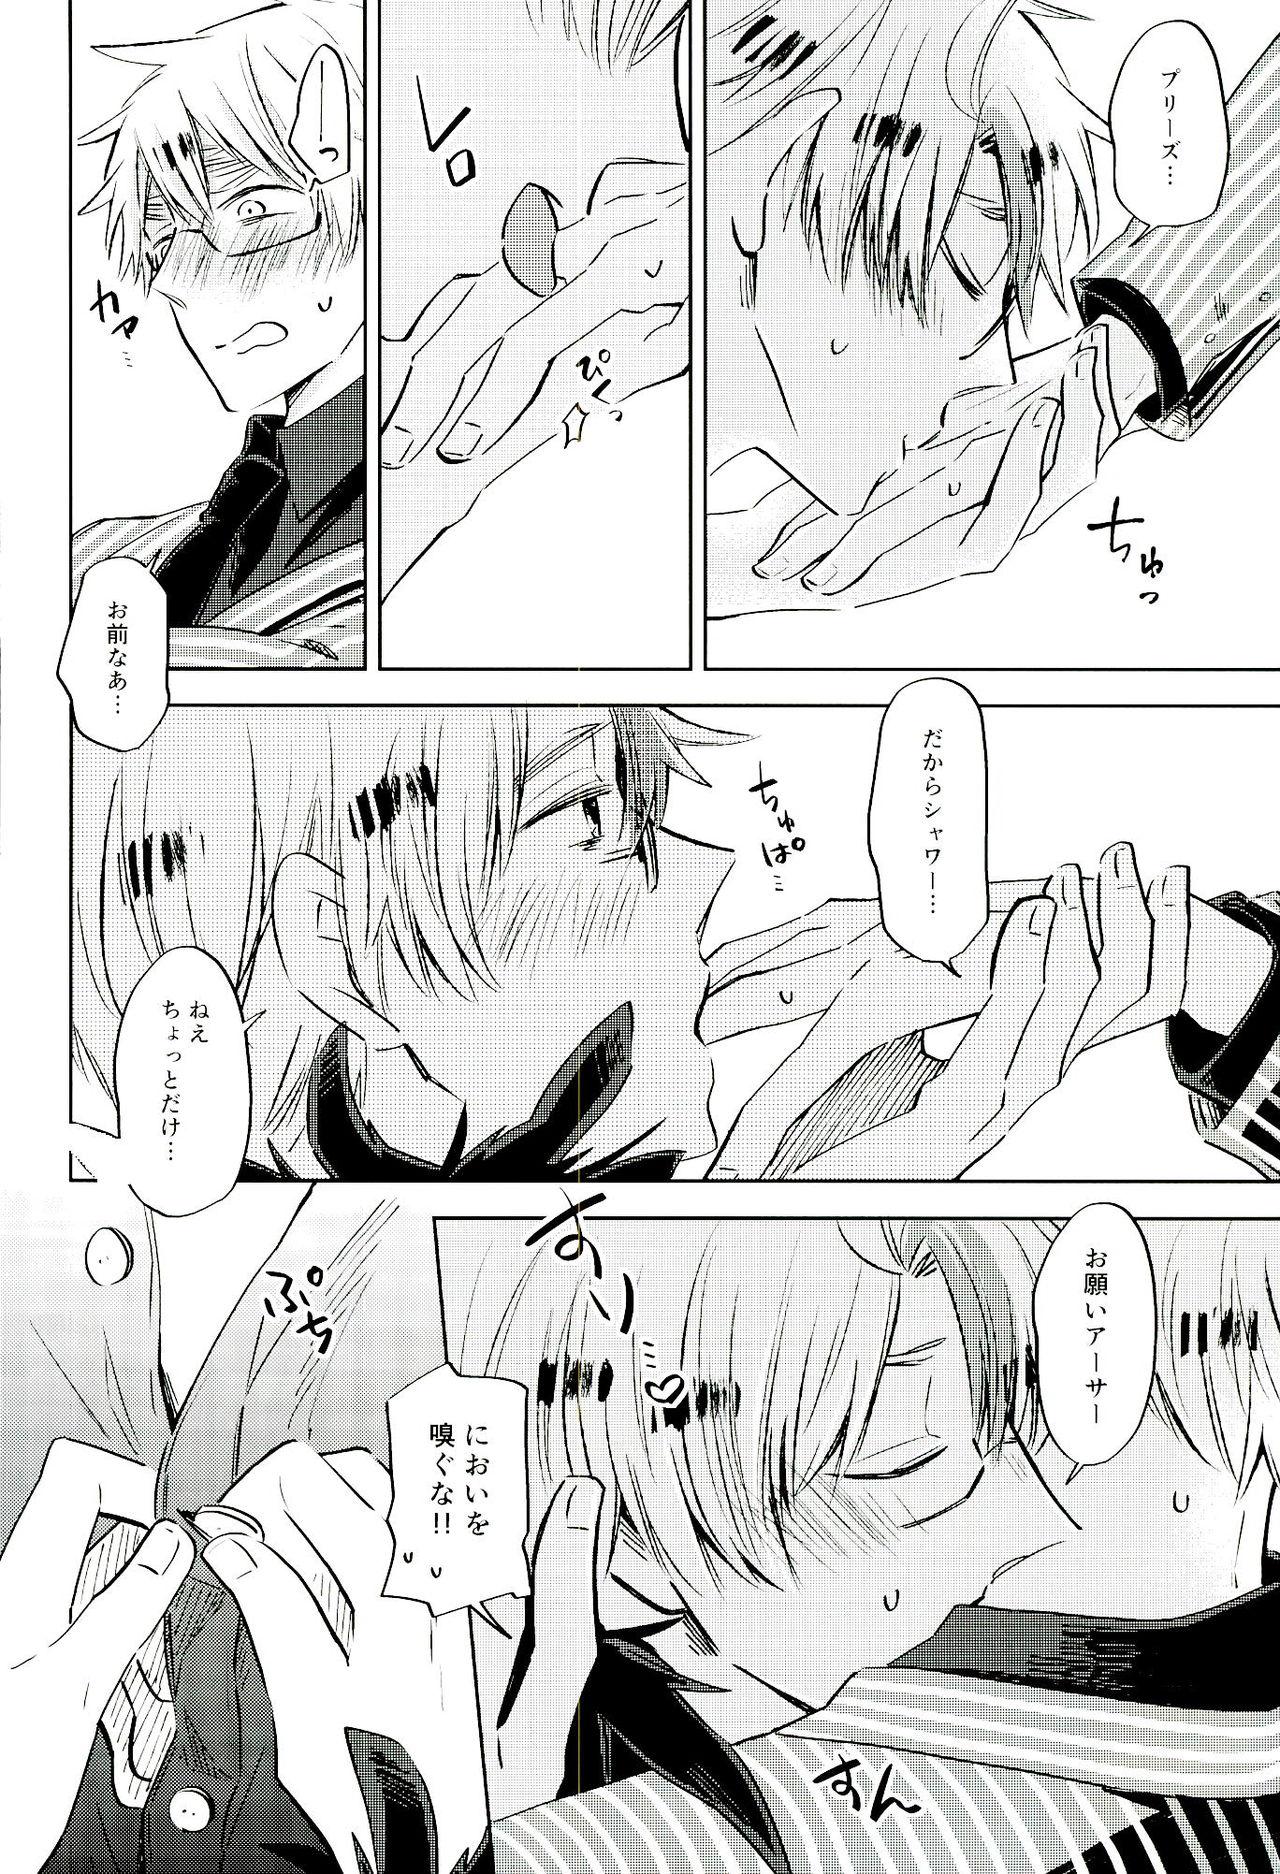 Black Ameagari no Slip Out - Axis powers hetalia Pussylicking - Page 9